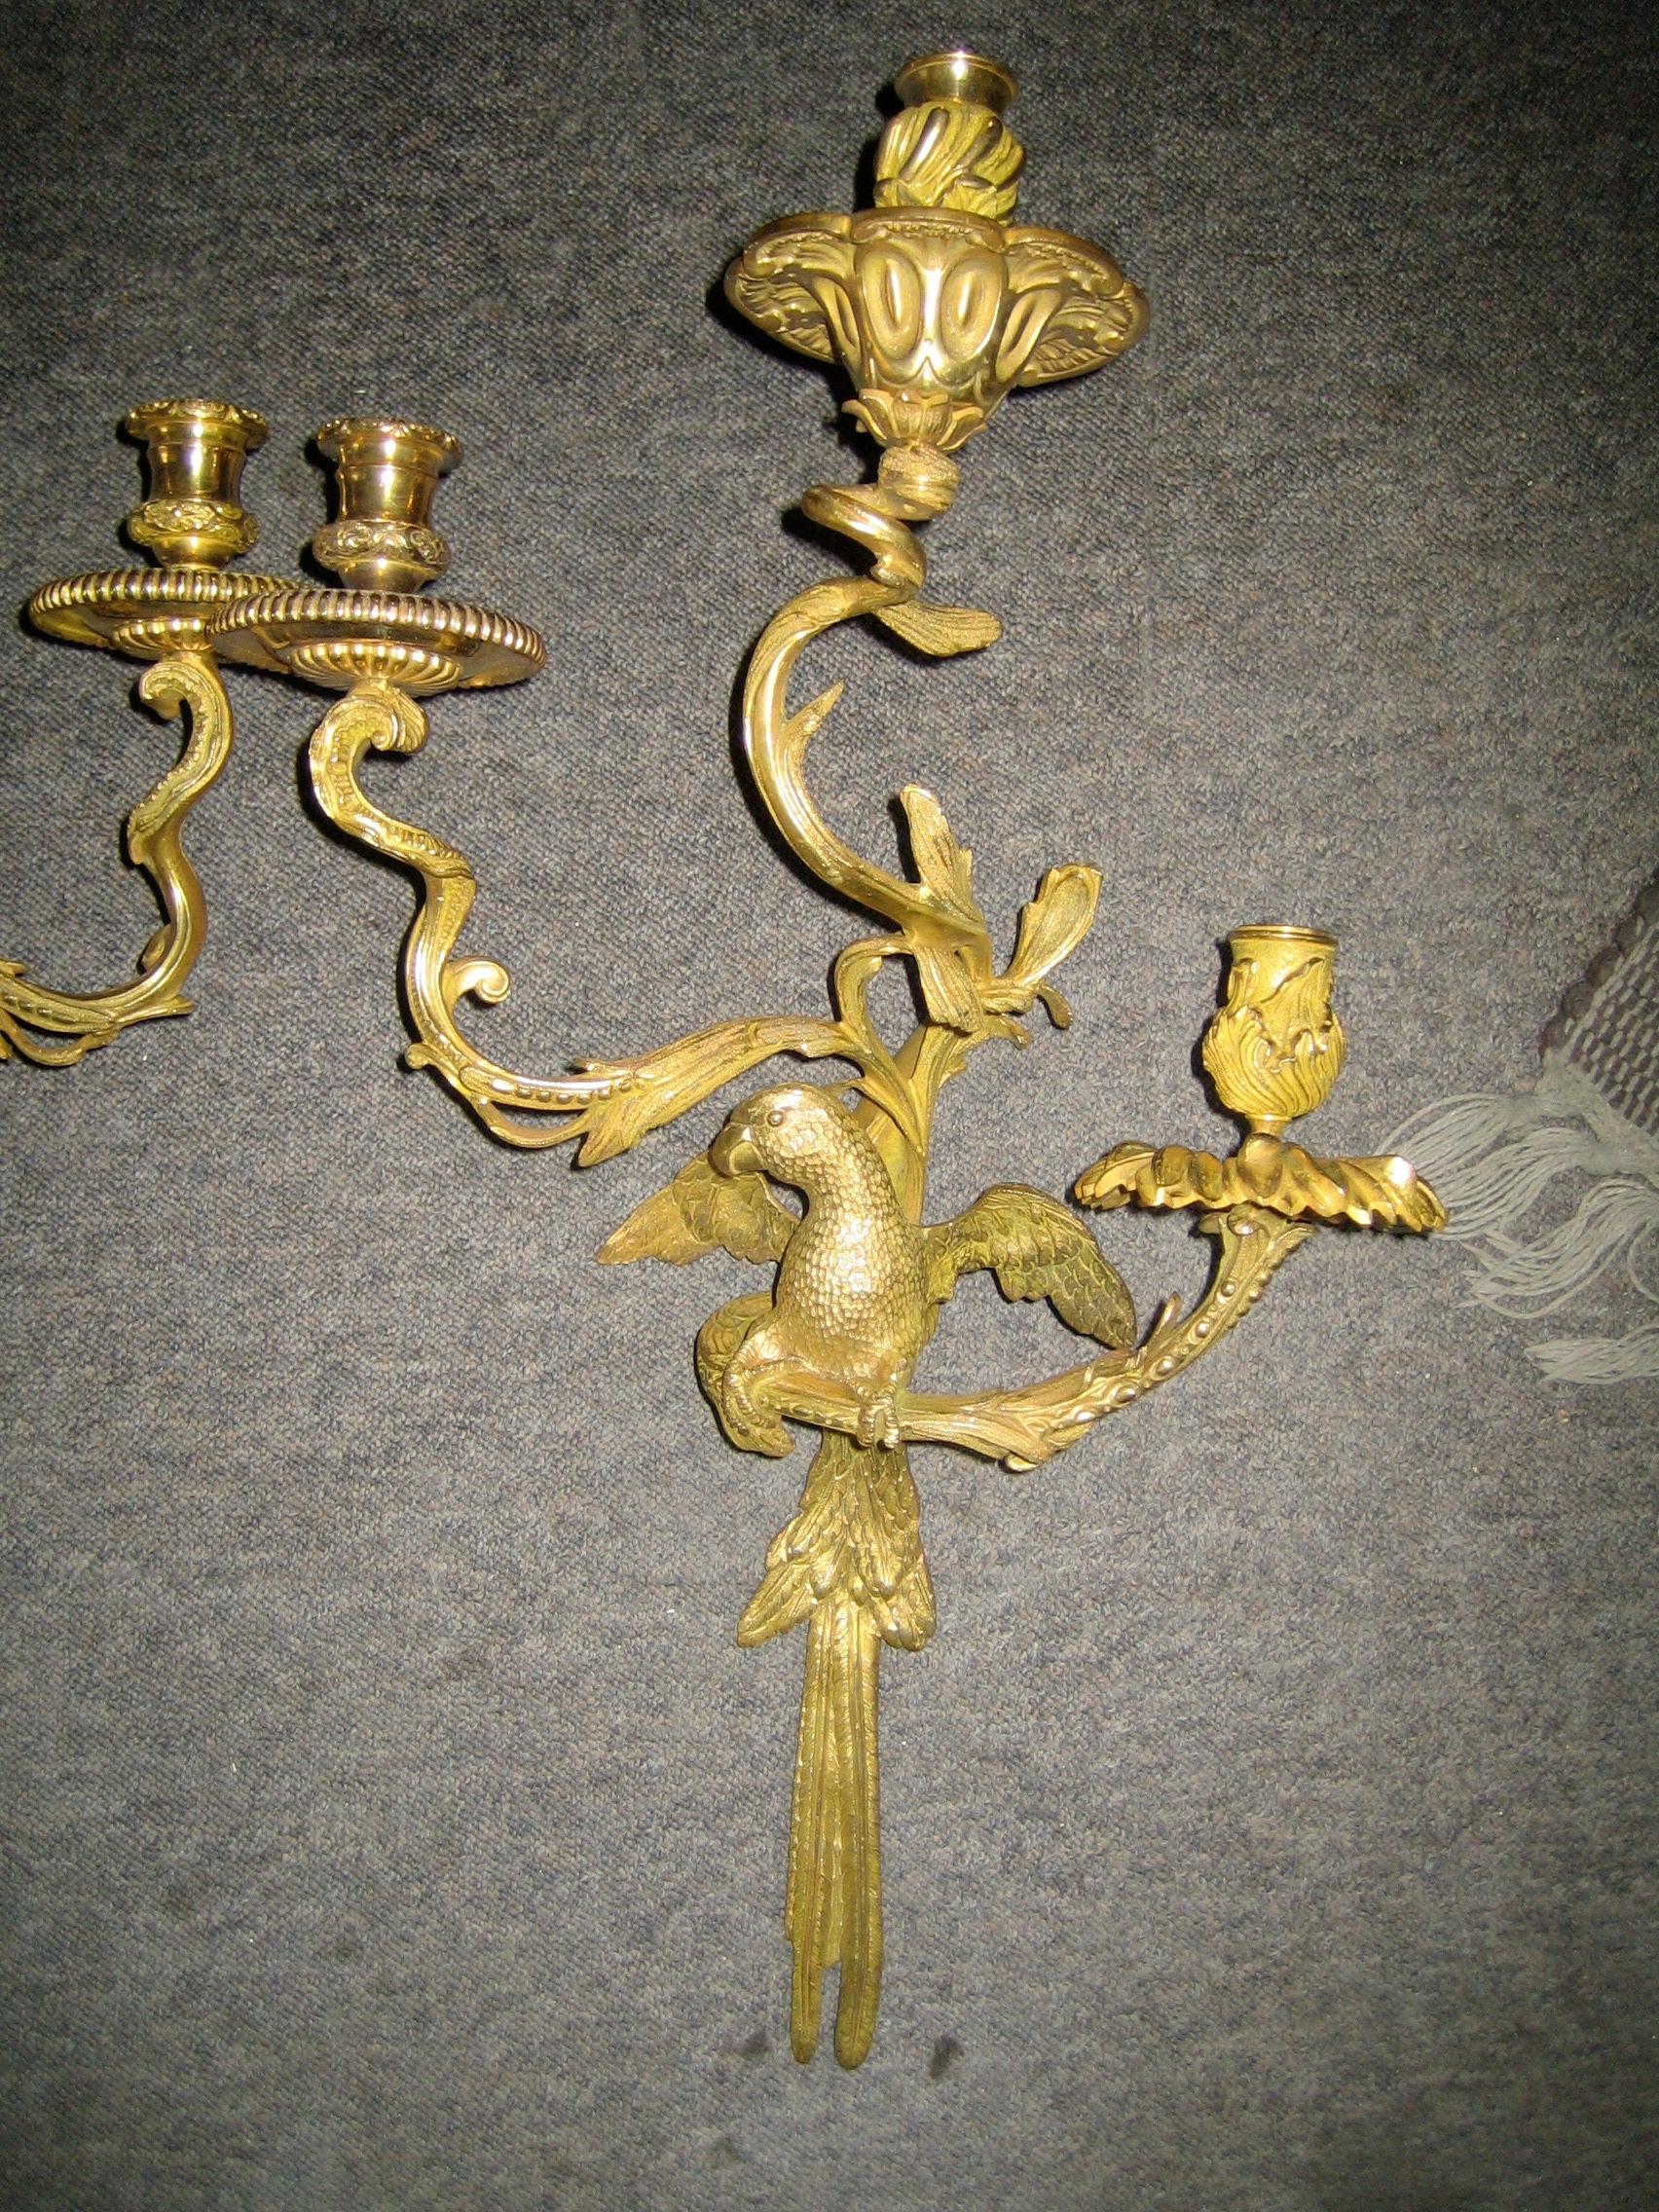 These are a pair of mid-19th century sconces (appliques) candelabras which were electrified. They are the Duc d'Enghien style sconces, as they were created by/for the Duke for his palace at Chantilly, where the originals can be seen as the last Duke